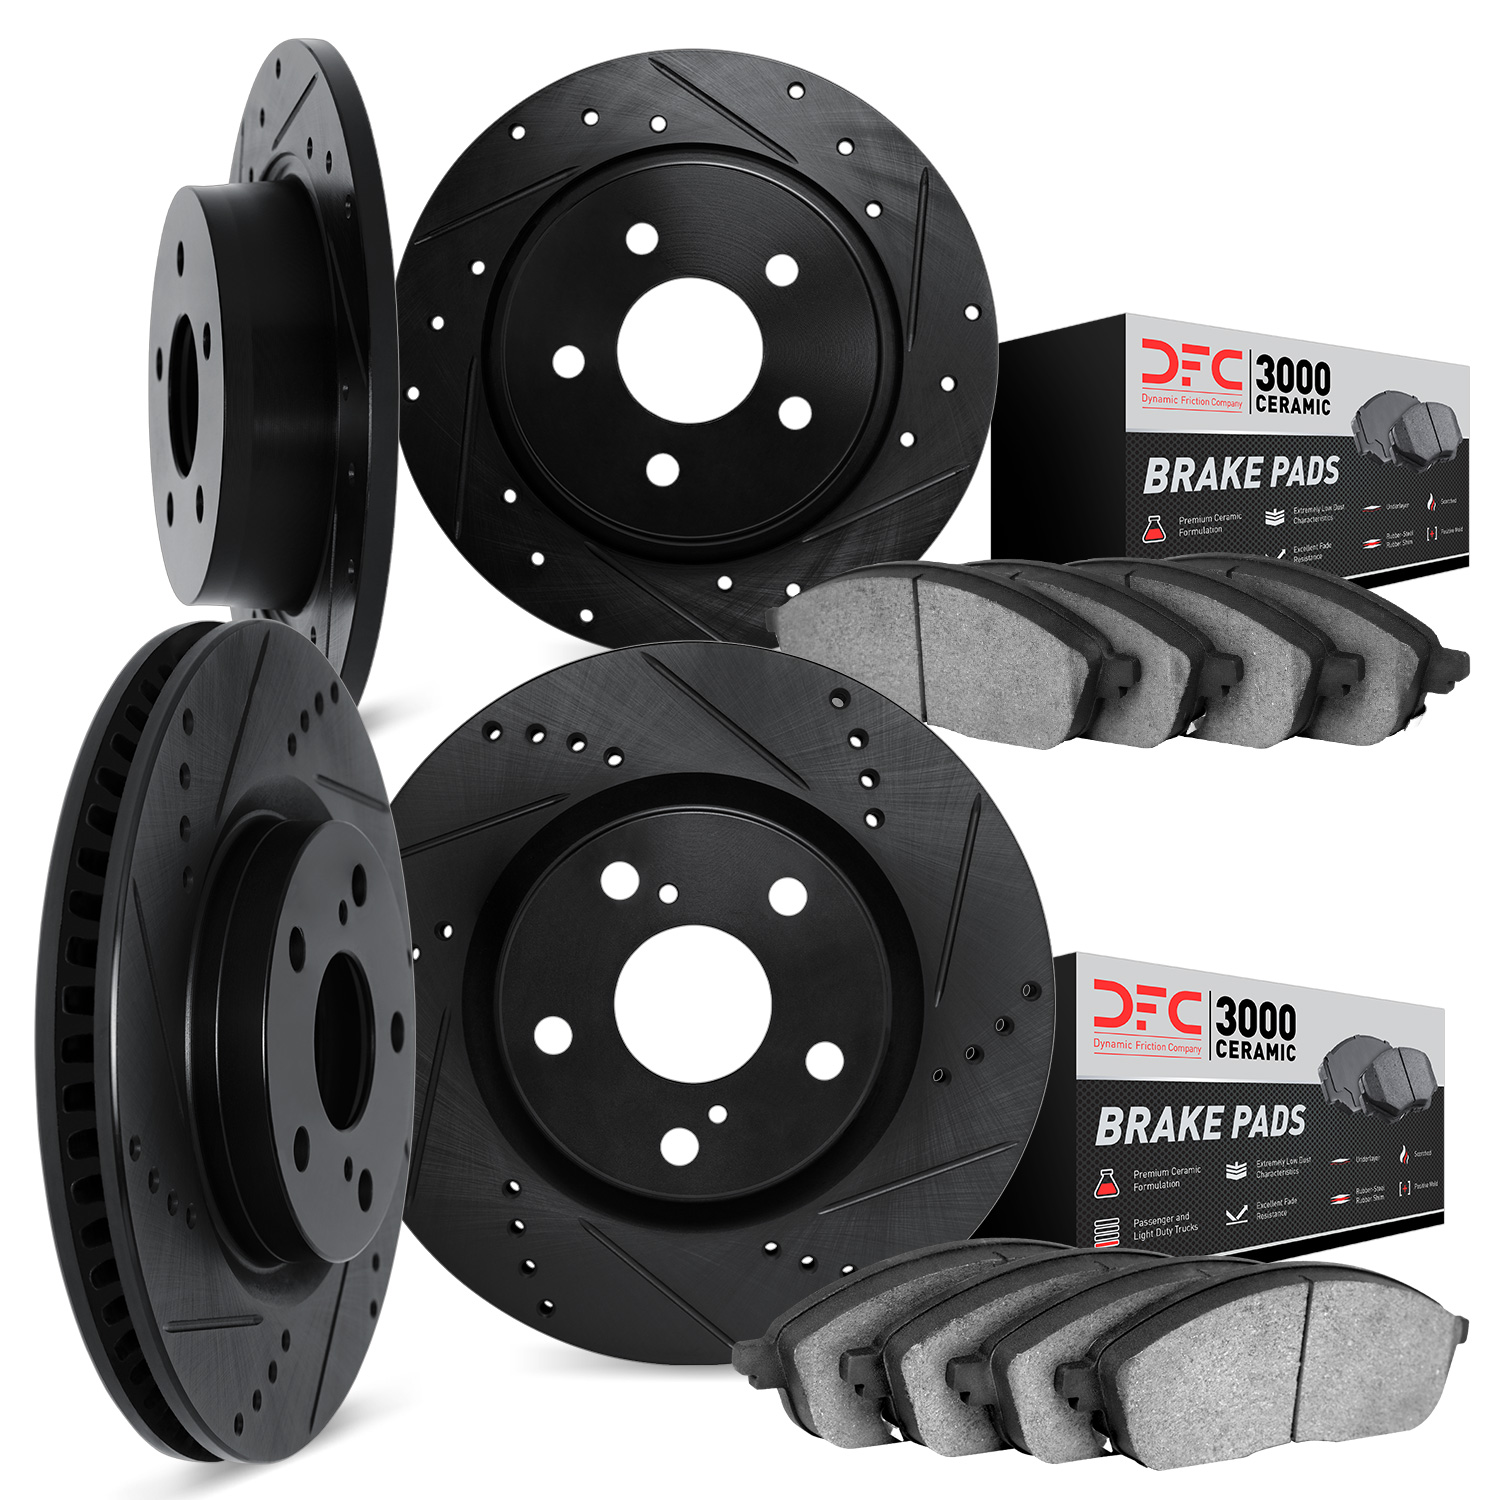 8304-63126 Drilled/Slotted Brake Rotors with 3000-Series Ceramic Brake Pads Kit [Black], 2006-2011 Mercedes-Benz, Position: Fron